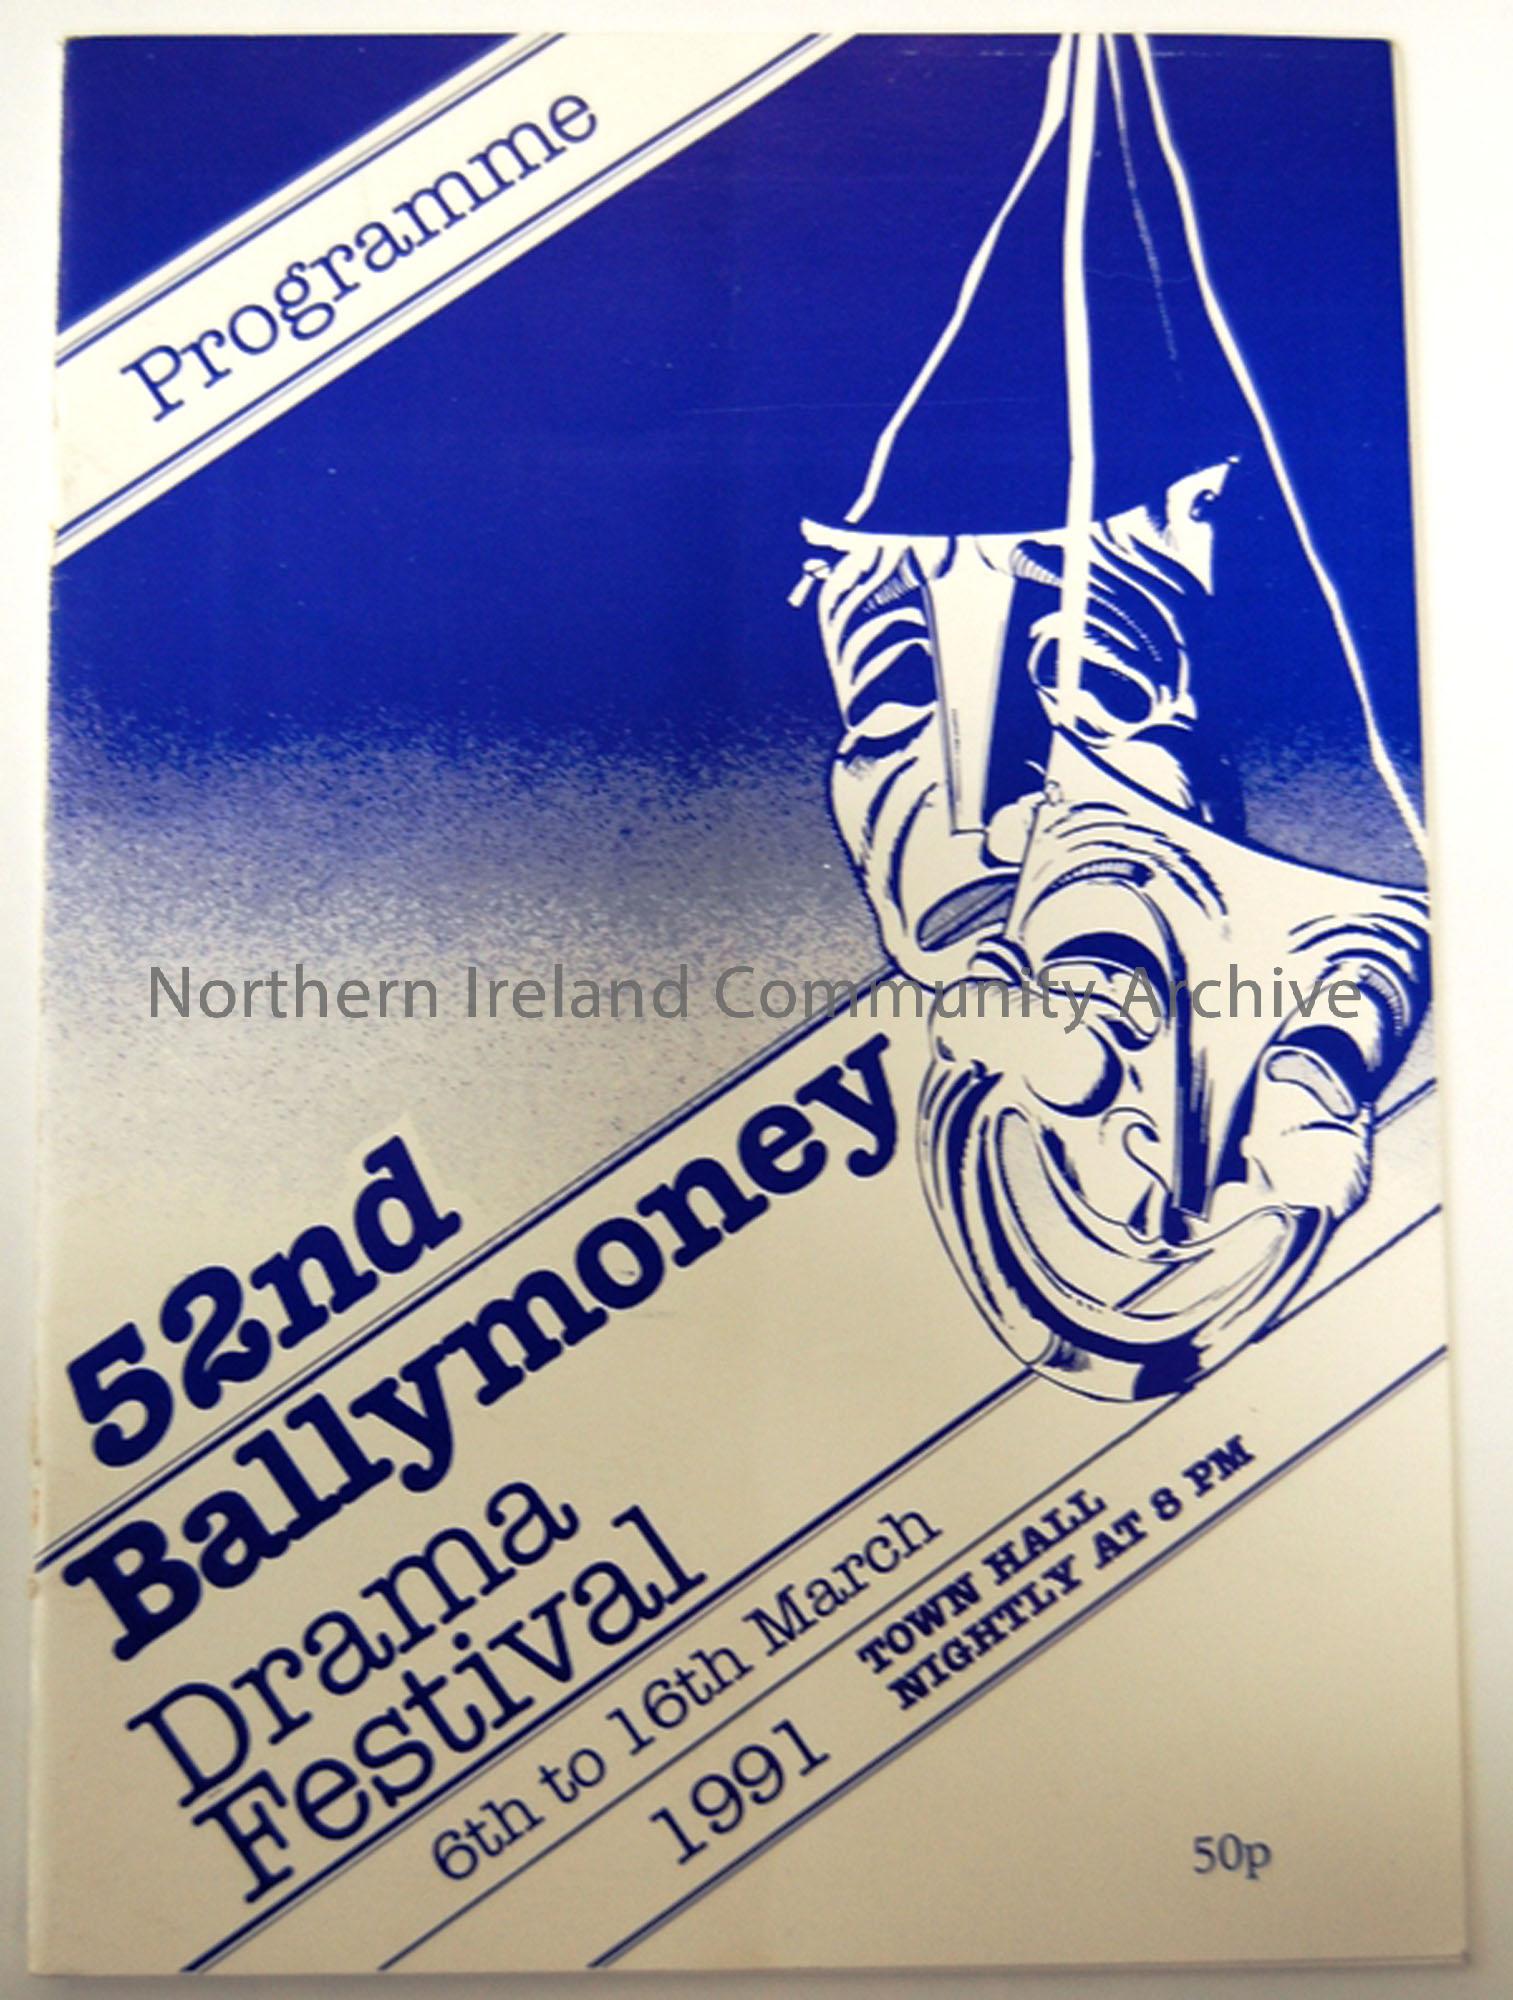 Programme of 52nd Ballymoney Drama Festival,1991 6th to 16th March